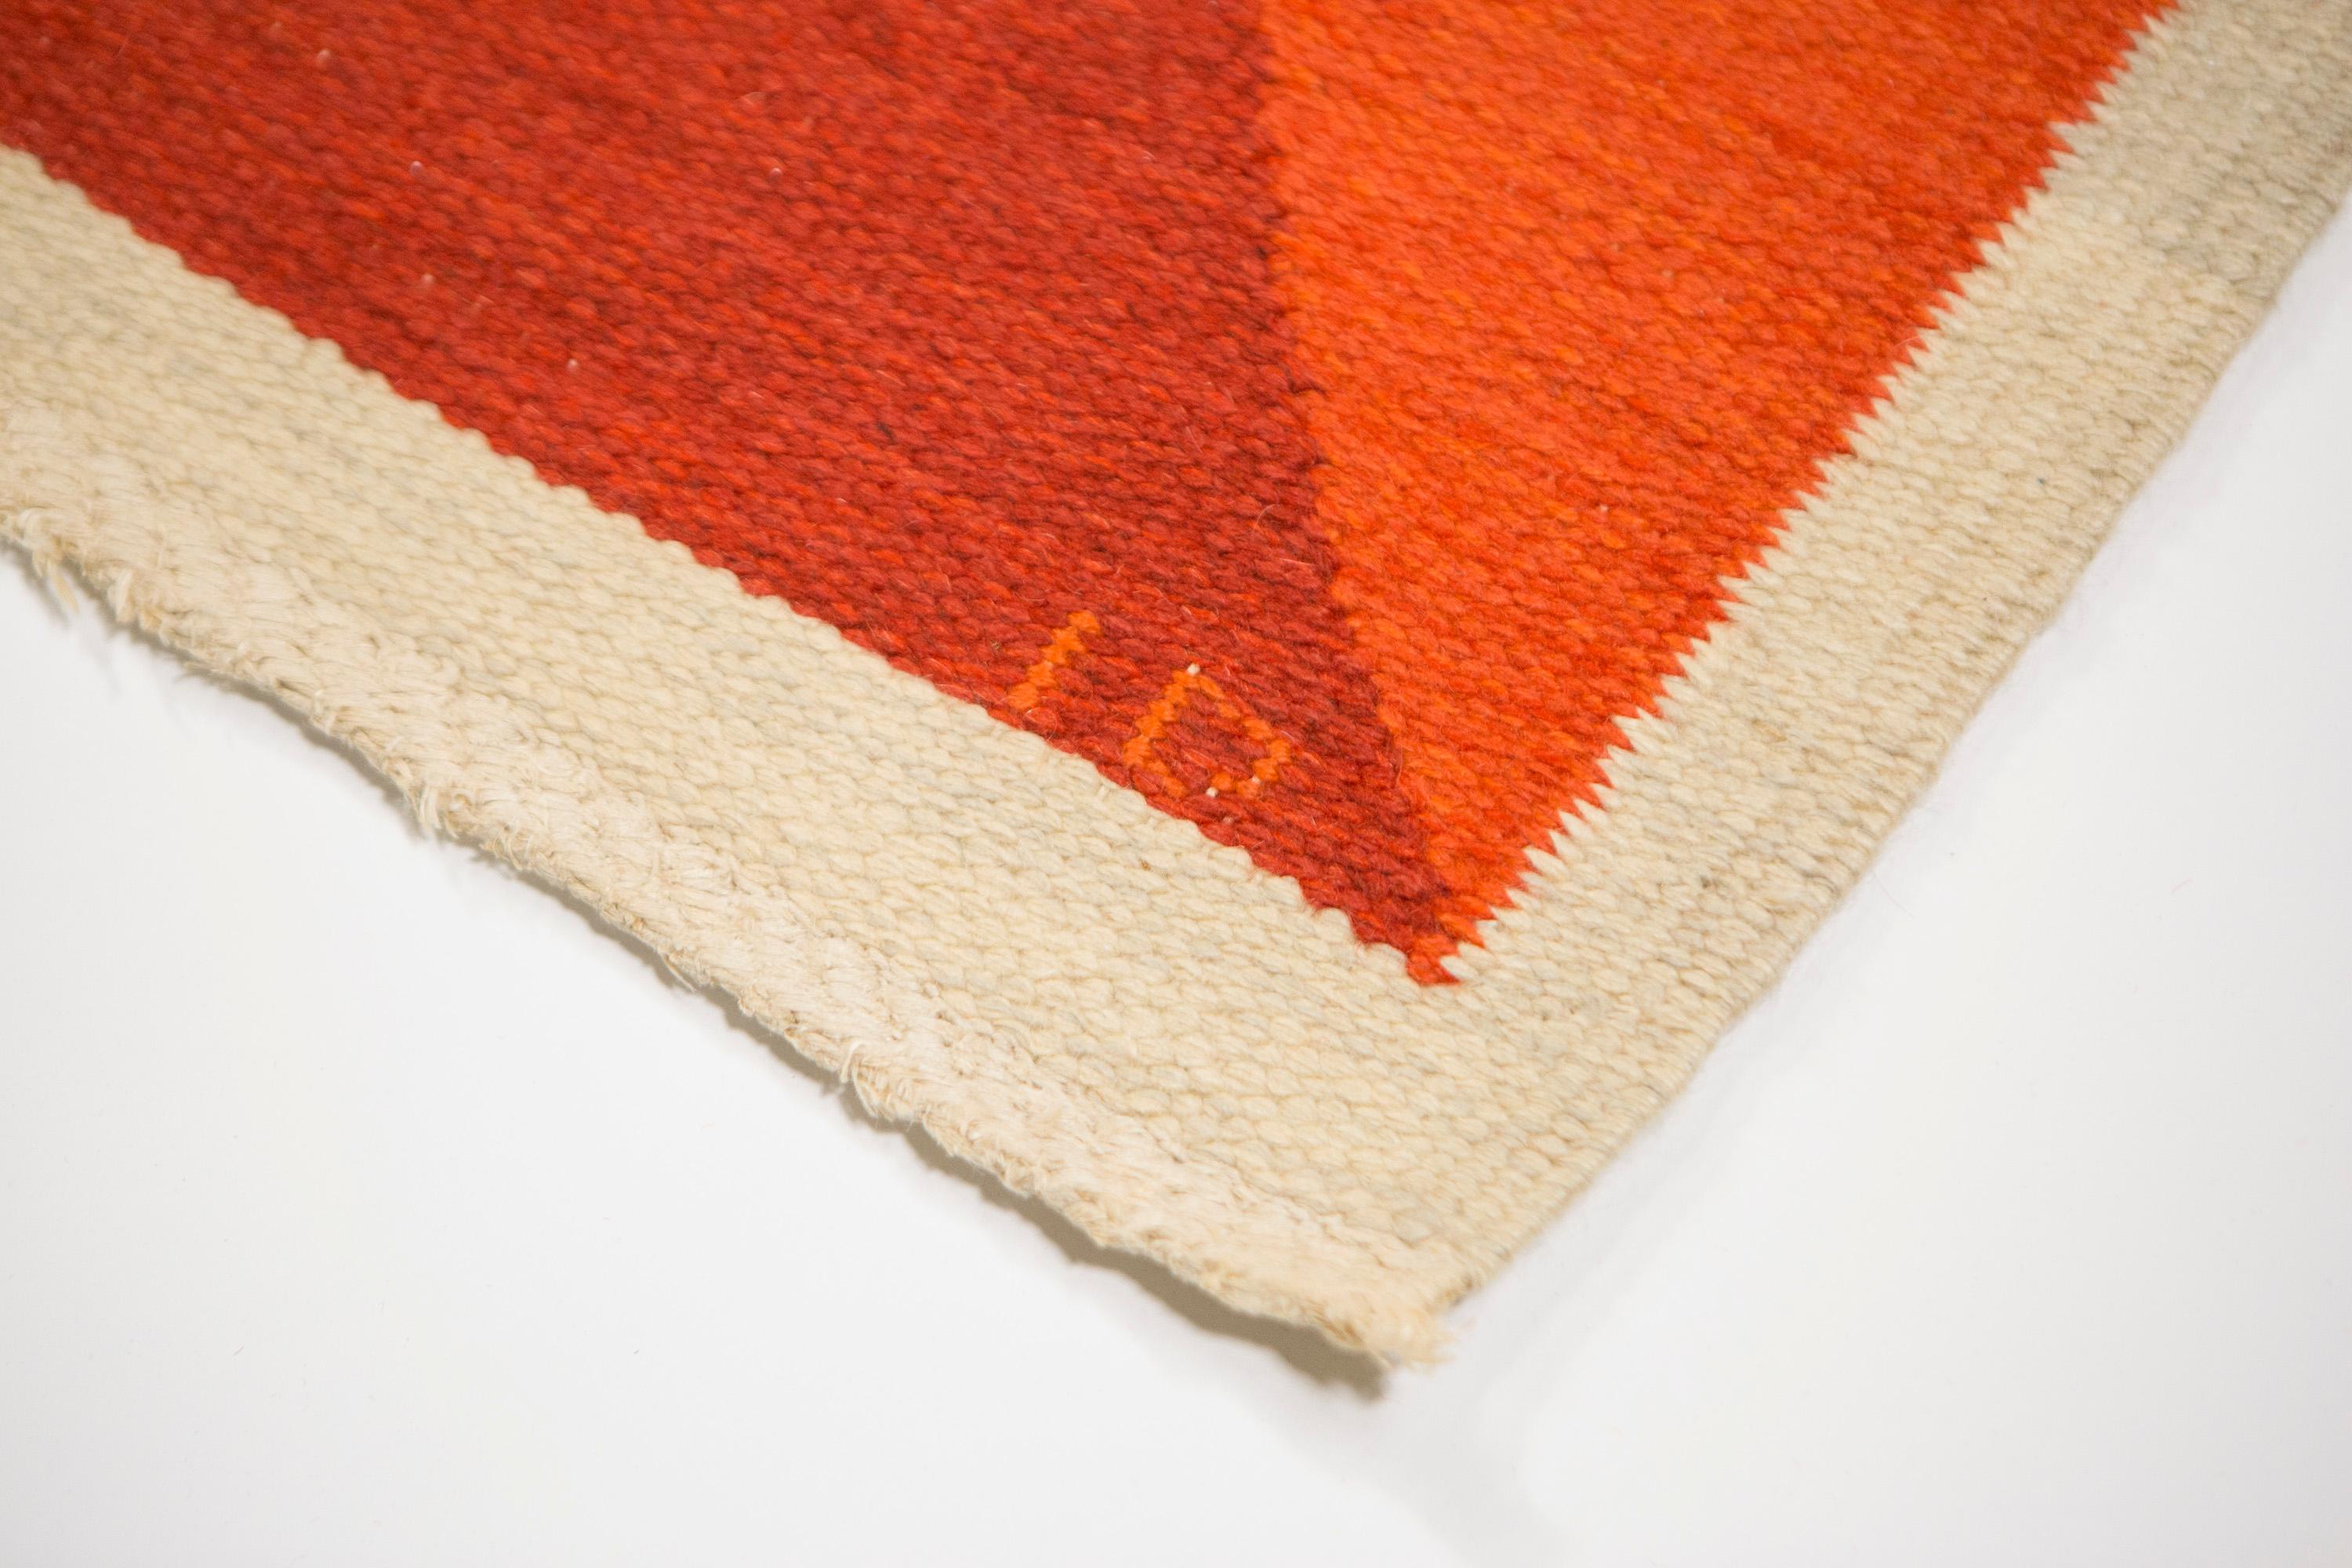 Ingrid Dessau Flat Weave Swedish rug for Malmöhus Läns Hemslöjd 1960's

211 x 204,5 cm, signed MLH ID

Four large sun-like ornaments in a variety of red, pink and orange nuances. An ivory border. Made without fringes.

Ingrid Dessau was a renowned